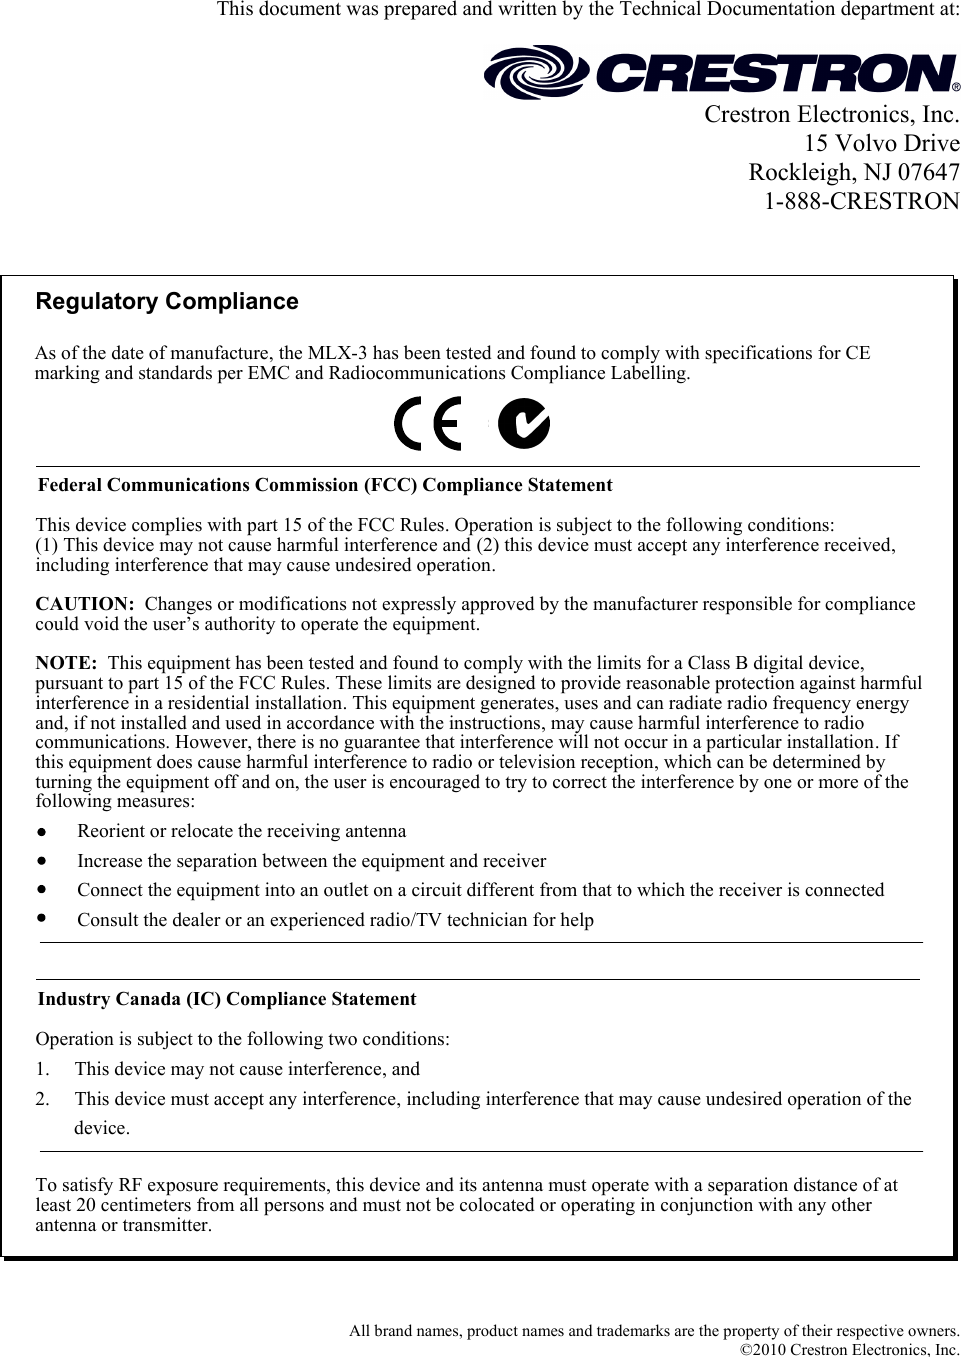   This document was prepared and written by the Technical Documentation department at:   Crestron Electronics, Inc. 15 Volvo Drive Rockleigh, NJ 07647 1-888-CRESTRON   Regulatory ComplianceTo satisfy RF exposure requirements, this device and its antenna must operate with a separation distance of at least 20 centimeters from all persons and must not be colocated or operating in conjunction with any other antenna or transmitter.Federal Communications Commission (FCC) Compliance StatementOperation is subject to the following two conditions:Industry Canada (IC) Compliance StatementThis device complies with part 15 of the FCC Rules. Operation is subject to the following conditions:(1) This device may not cause harmful interference and (2) this device must accept any interference received, including interference that may cause undesired operation.CAUTION:  Changes or modifications not expressly approved by the manufacturer responsible for compliance could void the user’s authority to operate the equipment. NOTE:  This equipment has been tested and found to comply with the limits for a Class B digital device, pursuant to part 15 of the FCC Rules. These limits are designed to provide reasonable protection against harmful interference in a residential installation. This equipment generates, uses and can radiate radio frequency energy and, if not installed and used in accordance with the instructions, may cause harmful interference to radio communications. However, there is no guarantee that interference will not occur in a particular installation. If this equipment does cause harmful interference to radio or television reception, which can be determined by turning the equipment off and on, the user is encouraged to try to correct the interference by one or more of the following measures:1.     This device may not cause interference, and2.     This device must accept any interference, including interference that may cause undesired operation of the           device.Reorient or relocate the receiving antennaIncrease the separation between the equipment and receiverConnect the equipment into an outlet on a circuit different from that to which the receiver is connectedConsult the dealer or an experienced radio/TV technician for helpAs of the date of manufacture, the MLX-3 has been tested and found to comply with specifications for CE marking and standards per EMC and Radiocommunications Compliance Labelling.   All brand names, product names and trademarks are the property of their respective owners. ©2010 Crestron Electronics, Inc.  